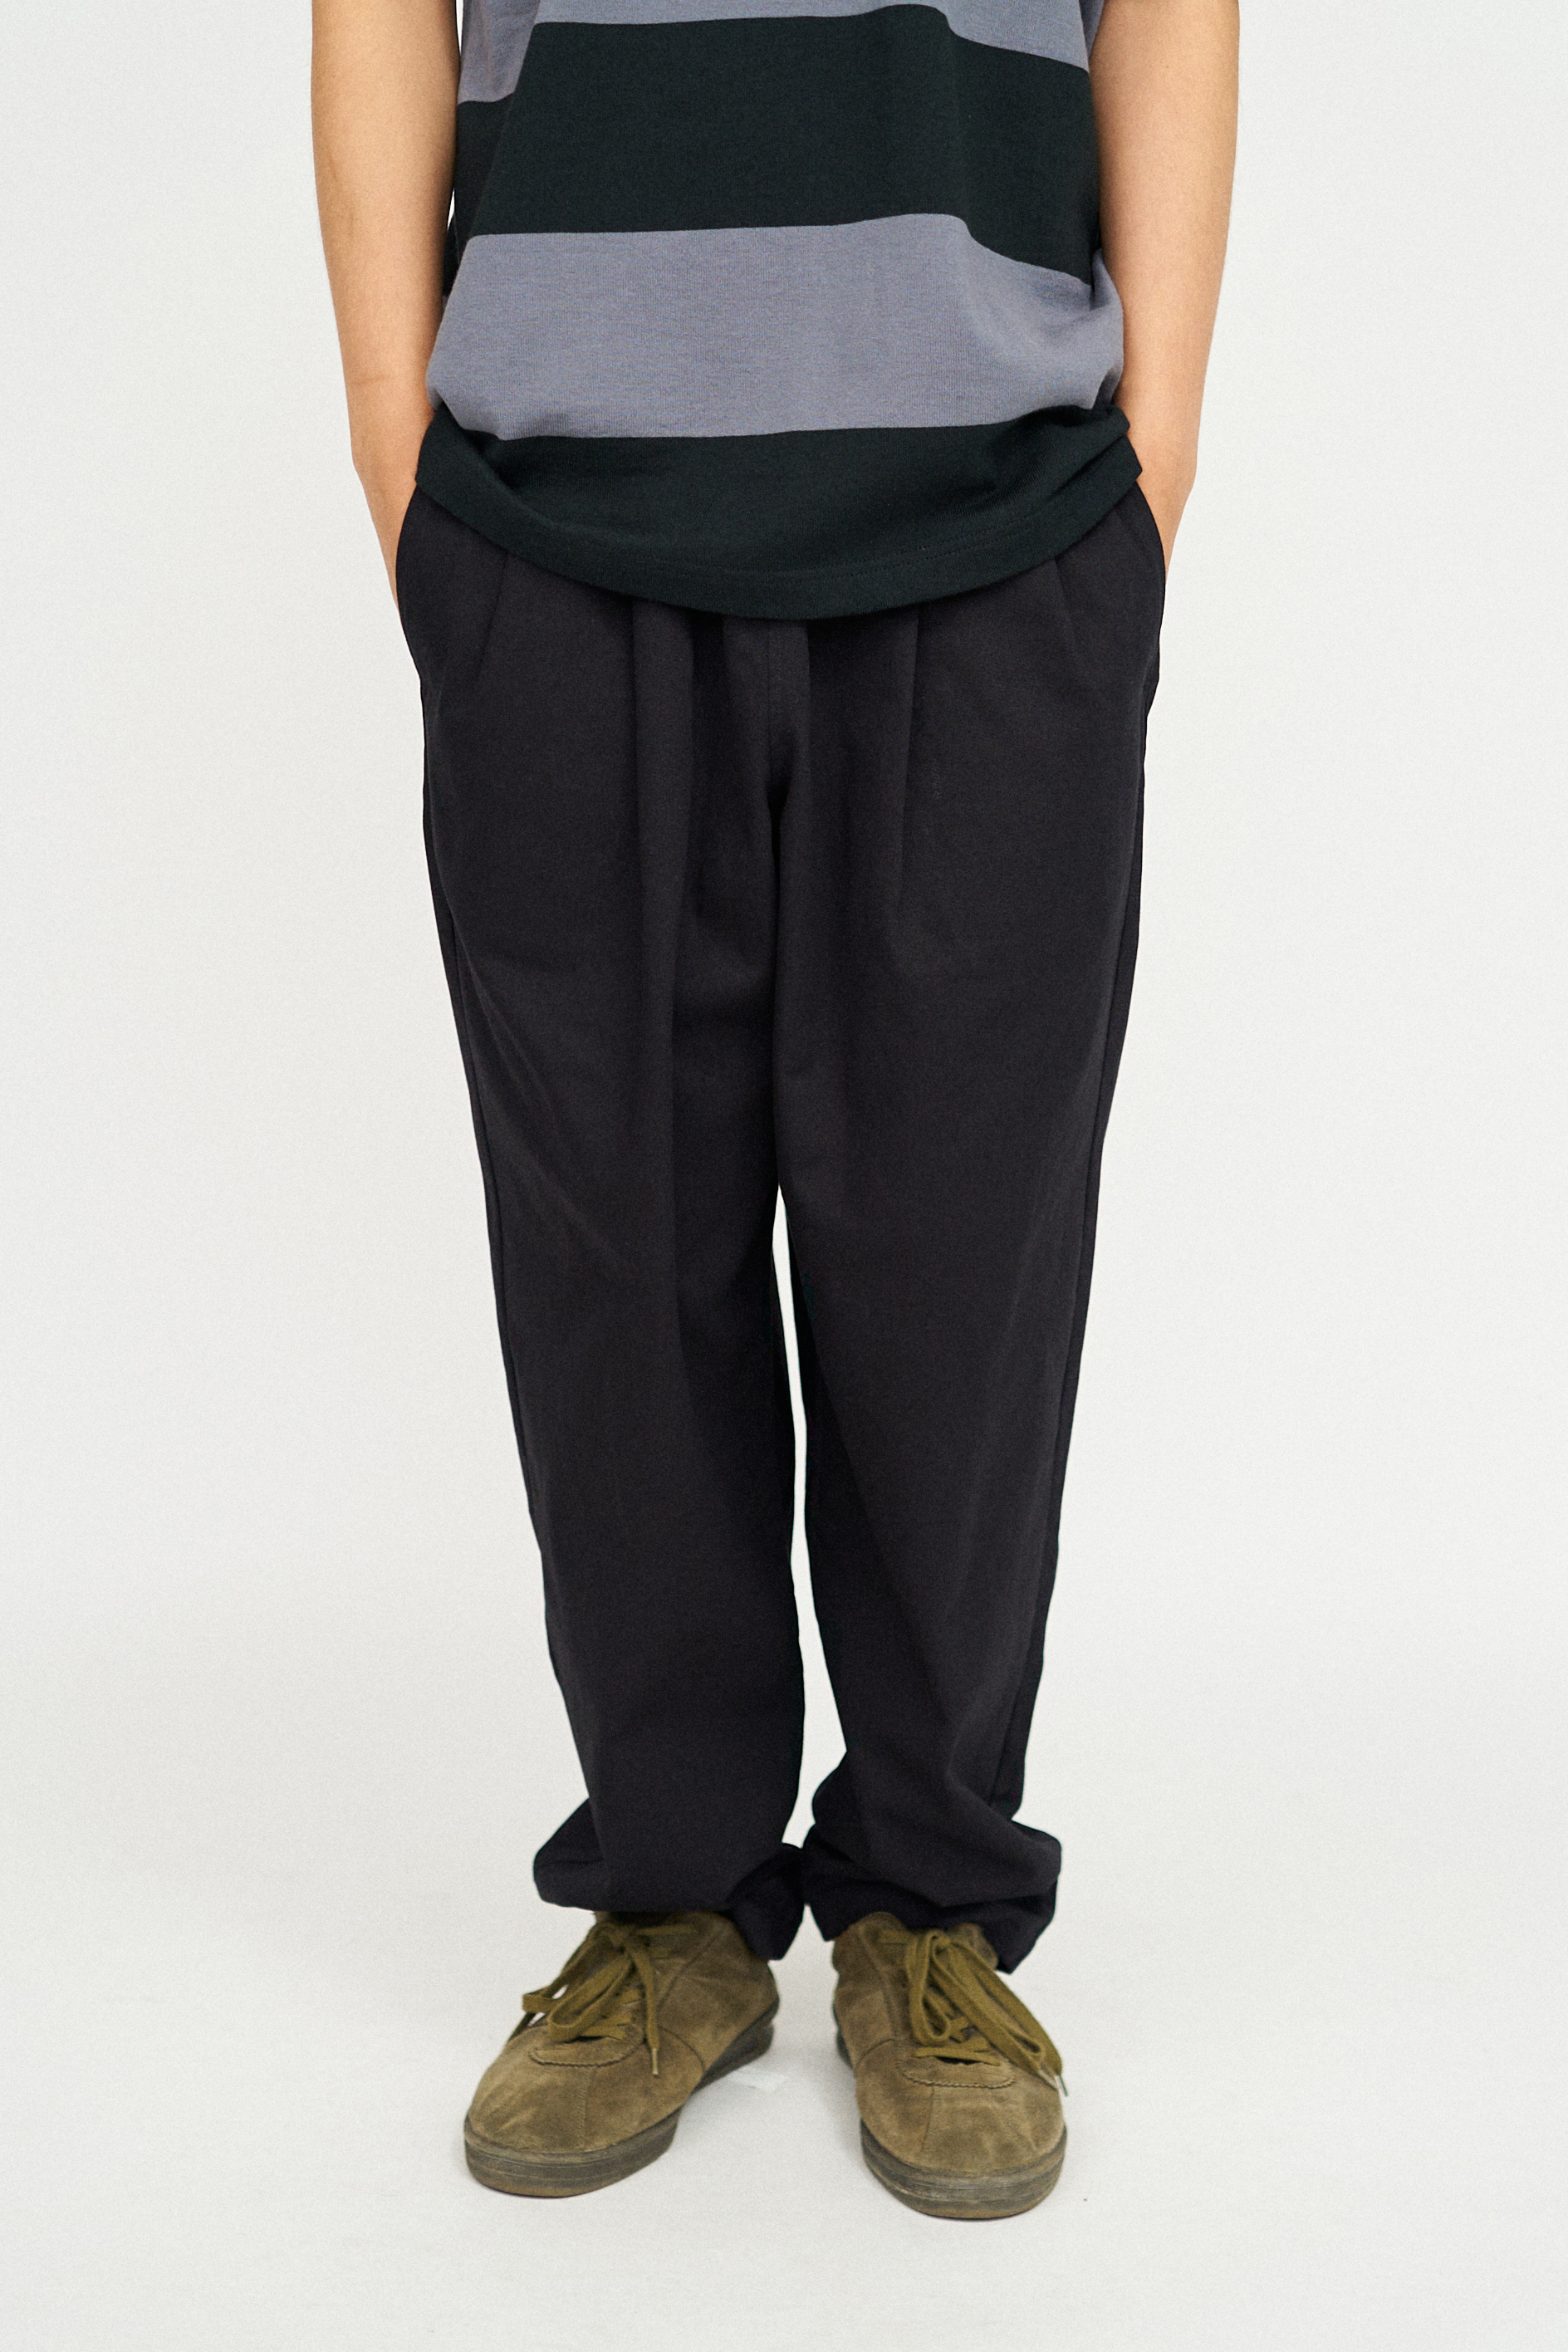 FRESH SERVICE CORPORATE EASY CHINO PANTS (3COL)